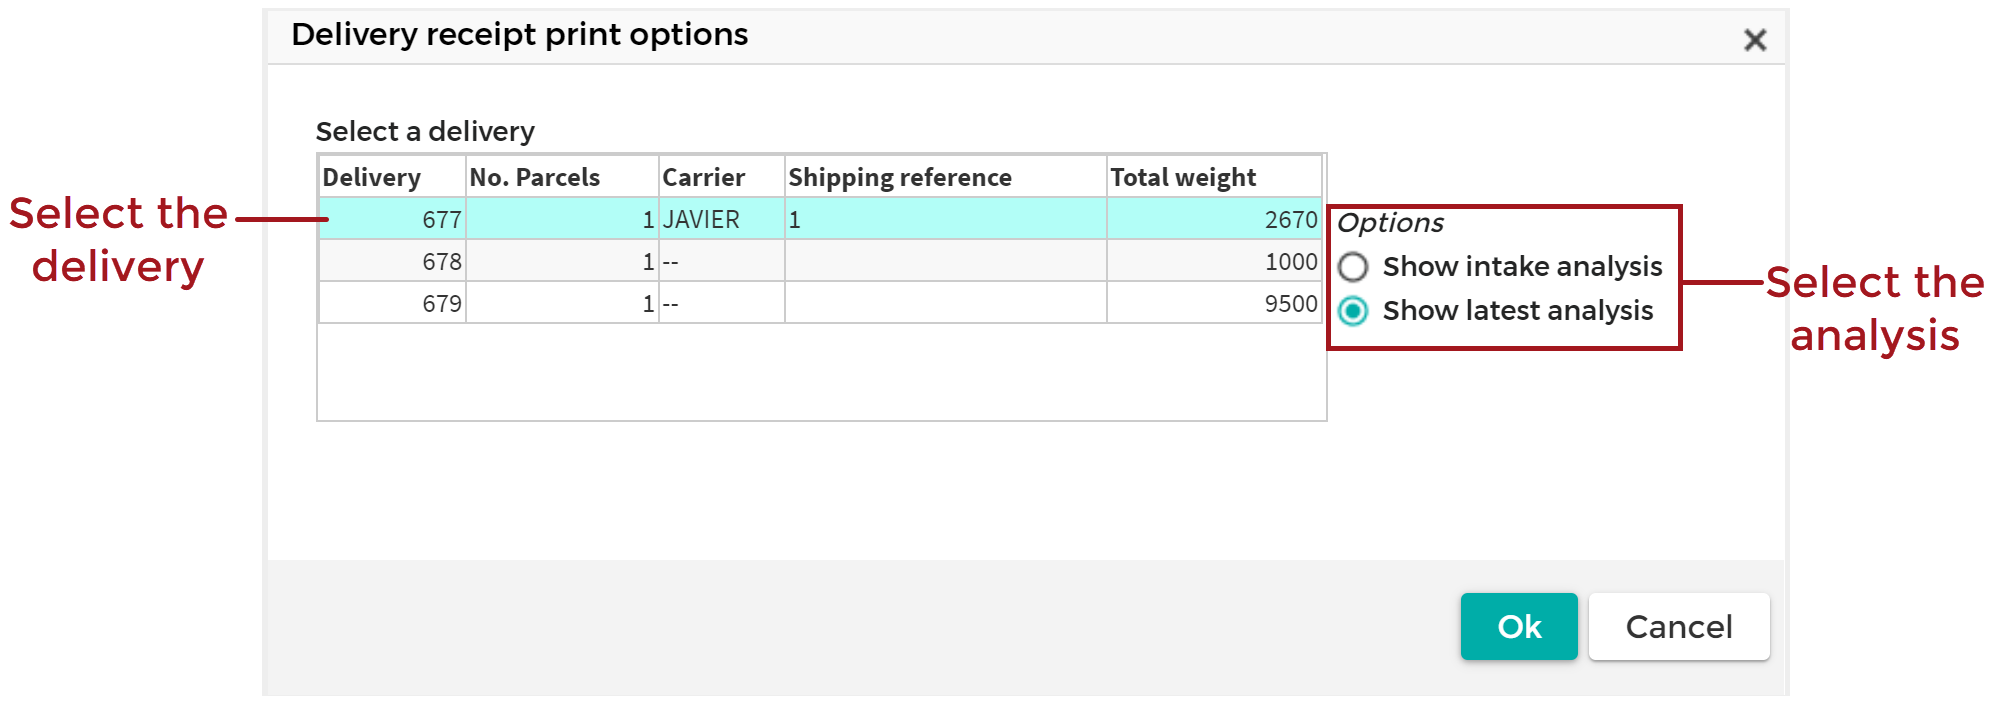 Delivery_Receipt_Print_Options_20200916.png